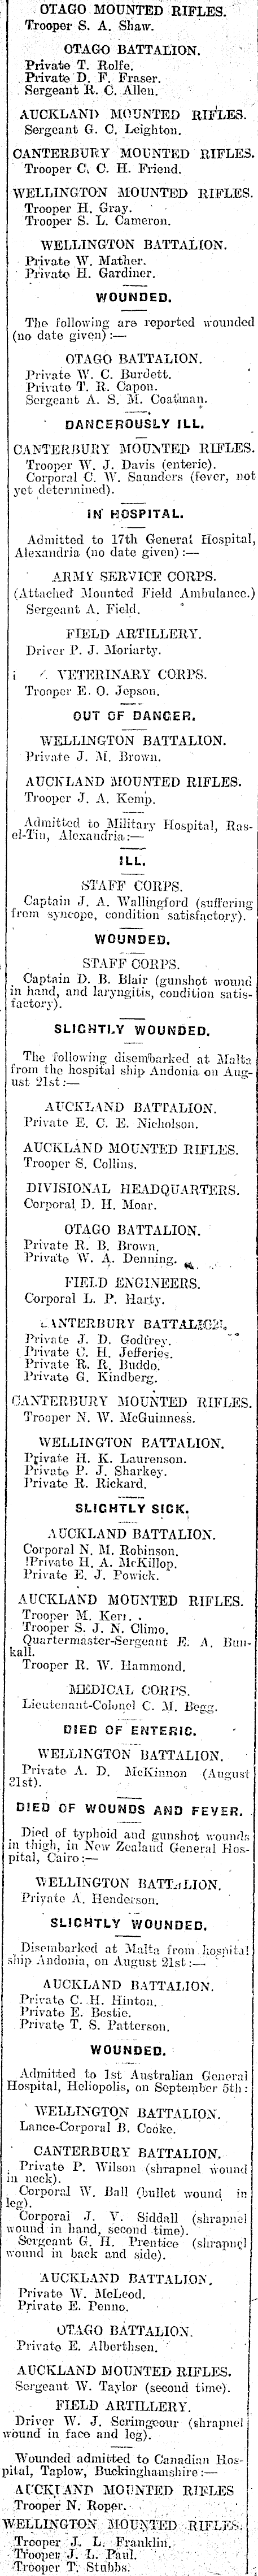 Papers Past Newspapers Colonist 13 September 1915 Page 2 Advertisements Column 5